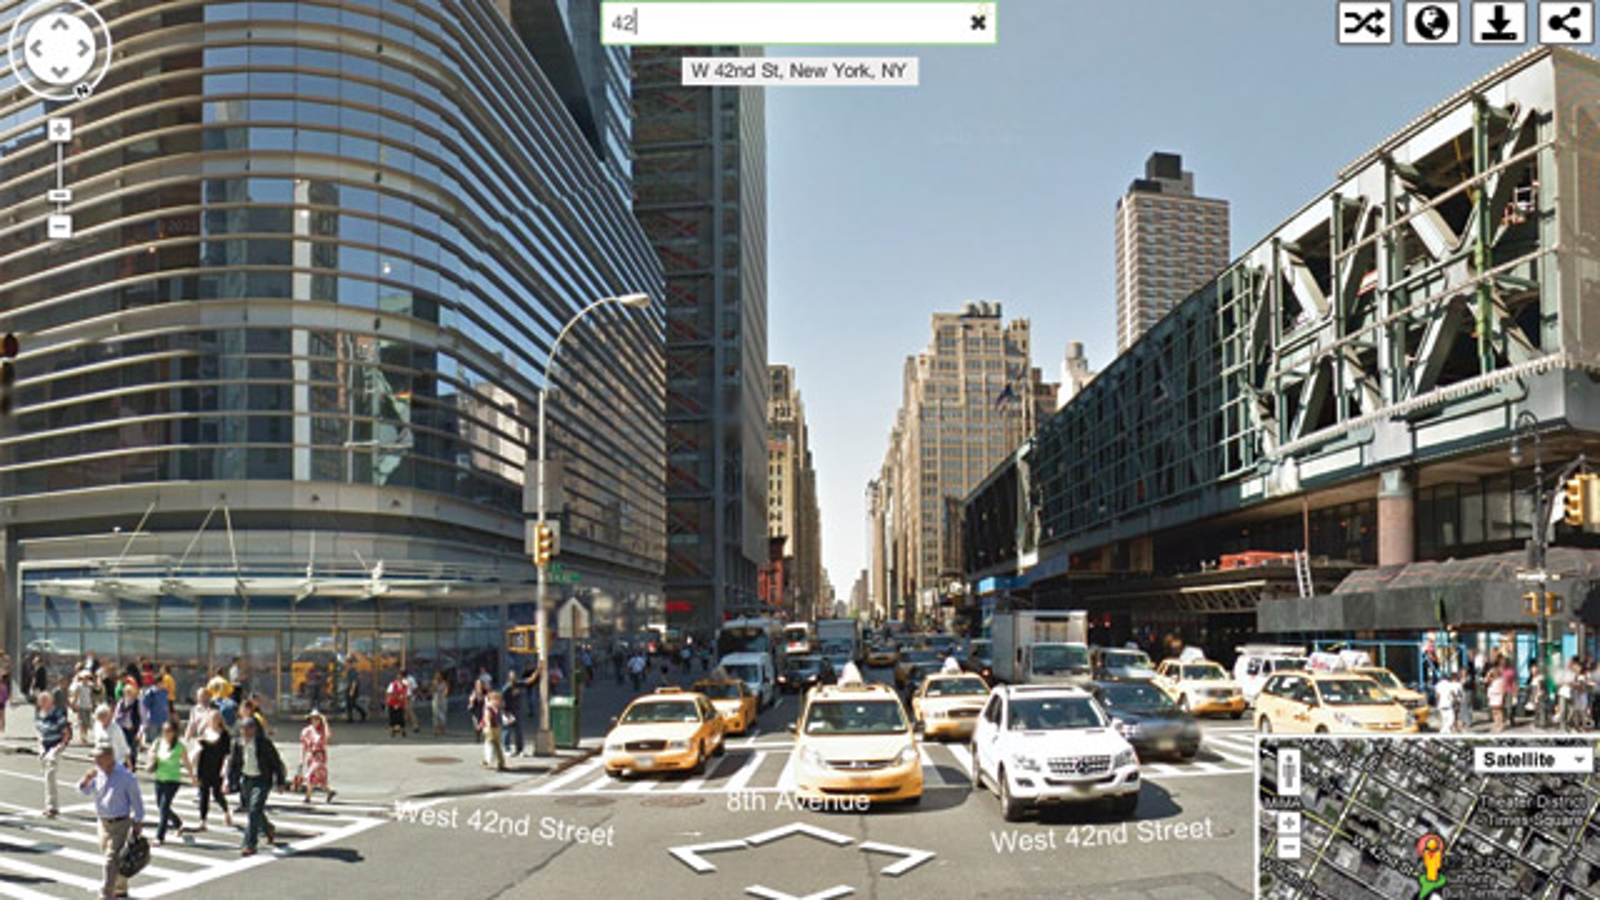 google earth instant street view